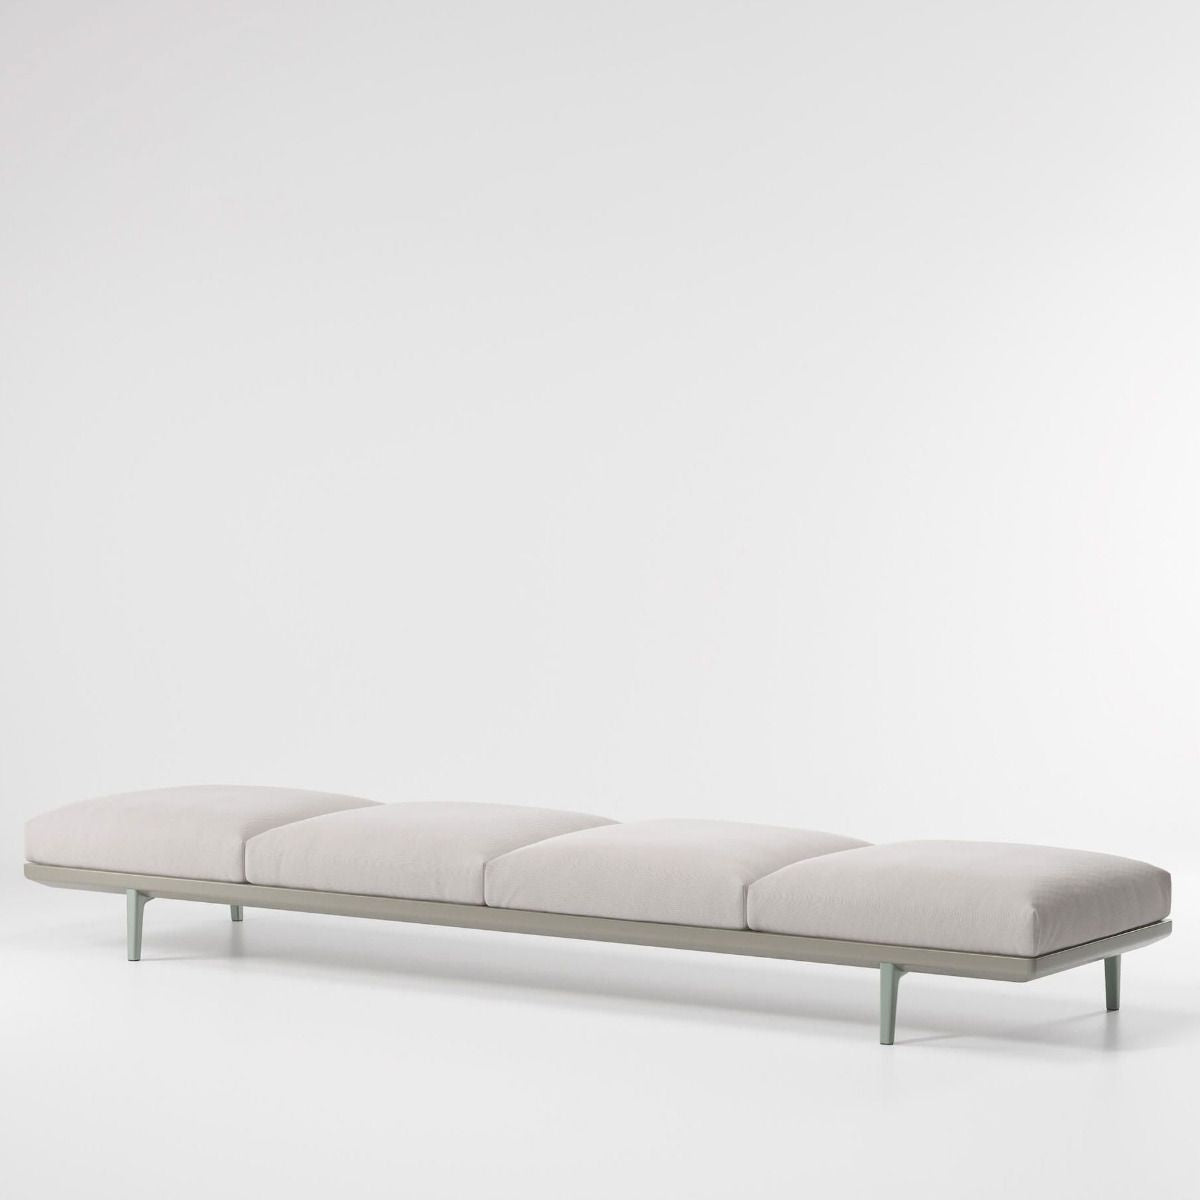 Kettal Boma Bench 4-Seater